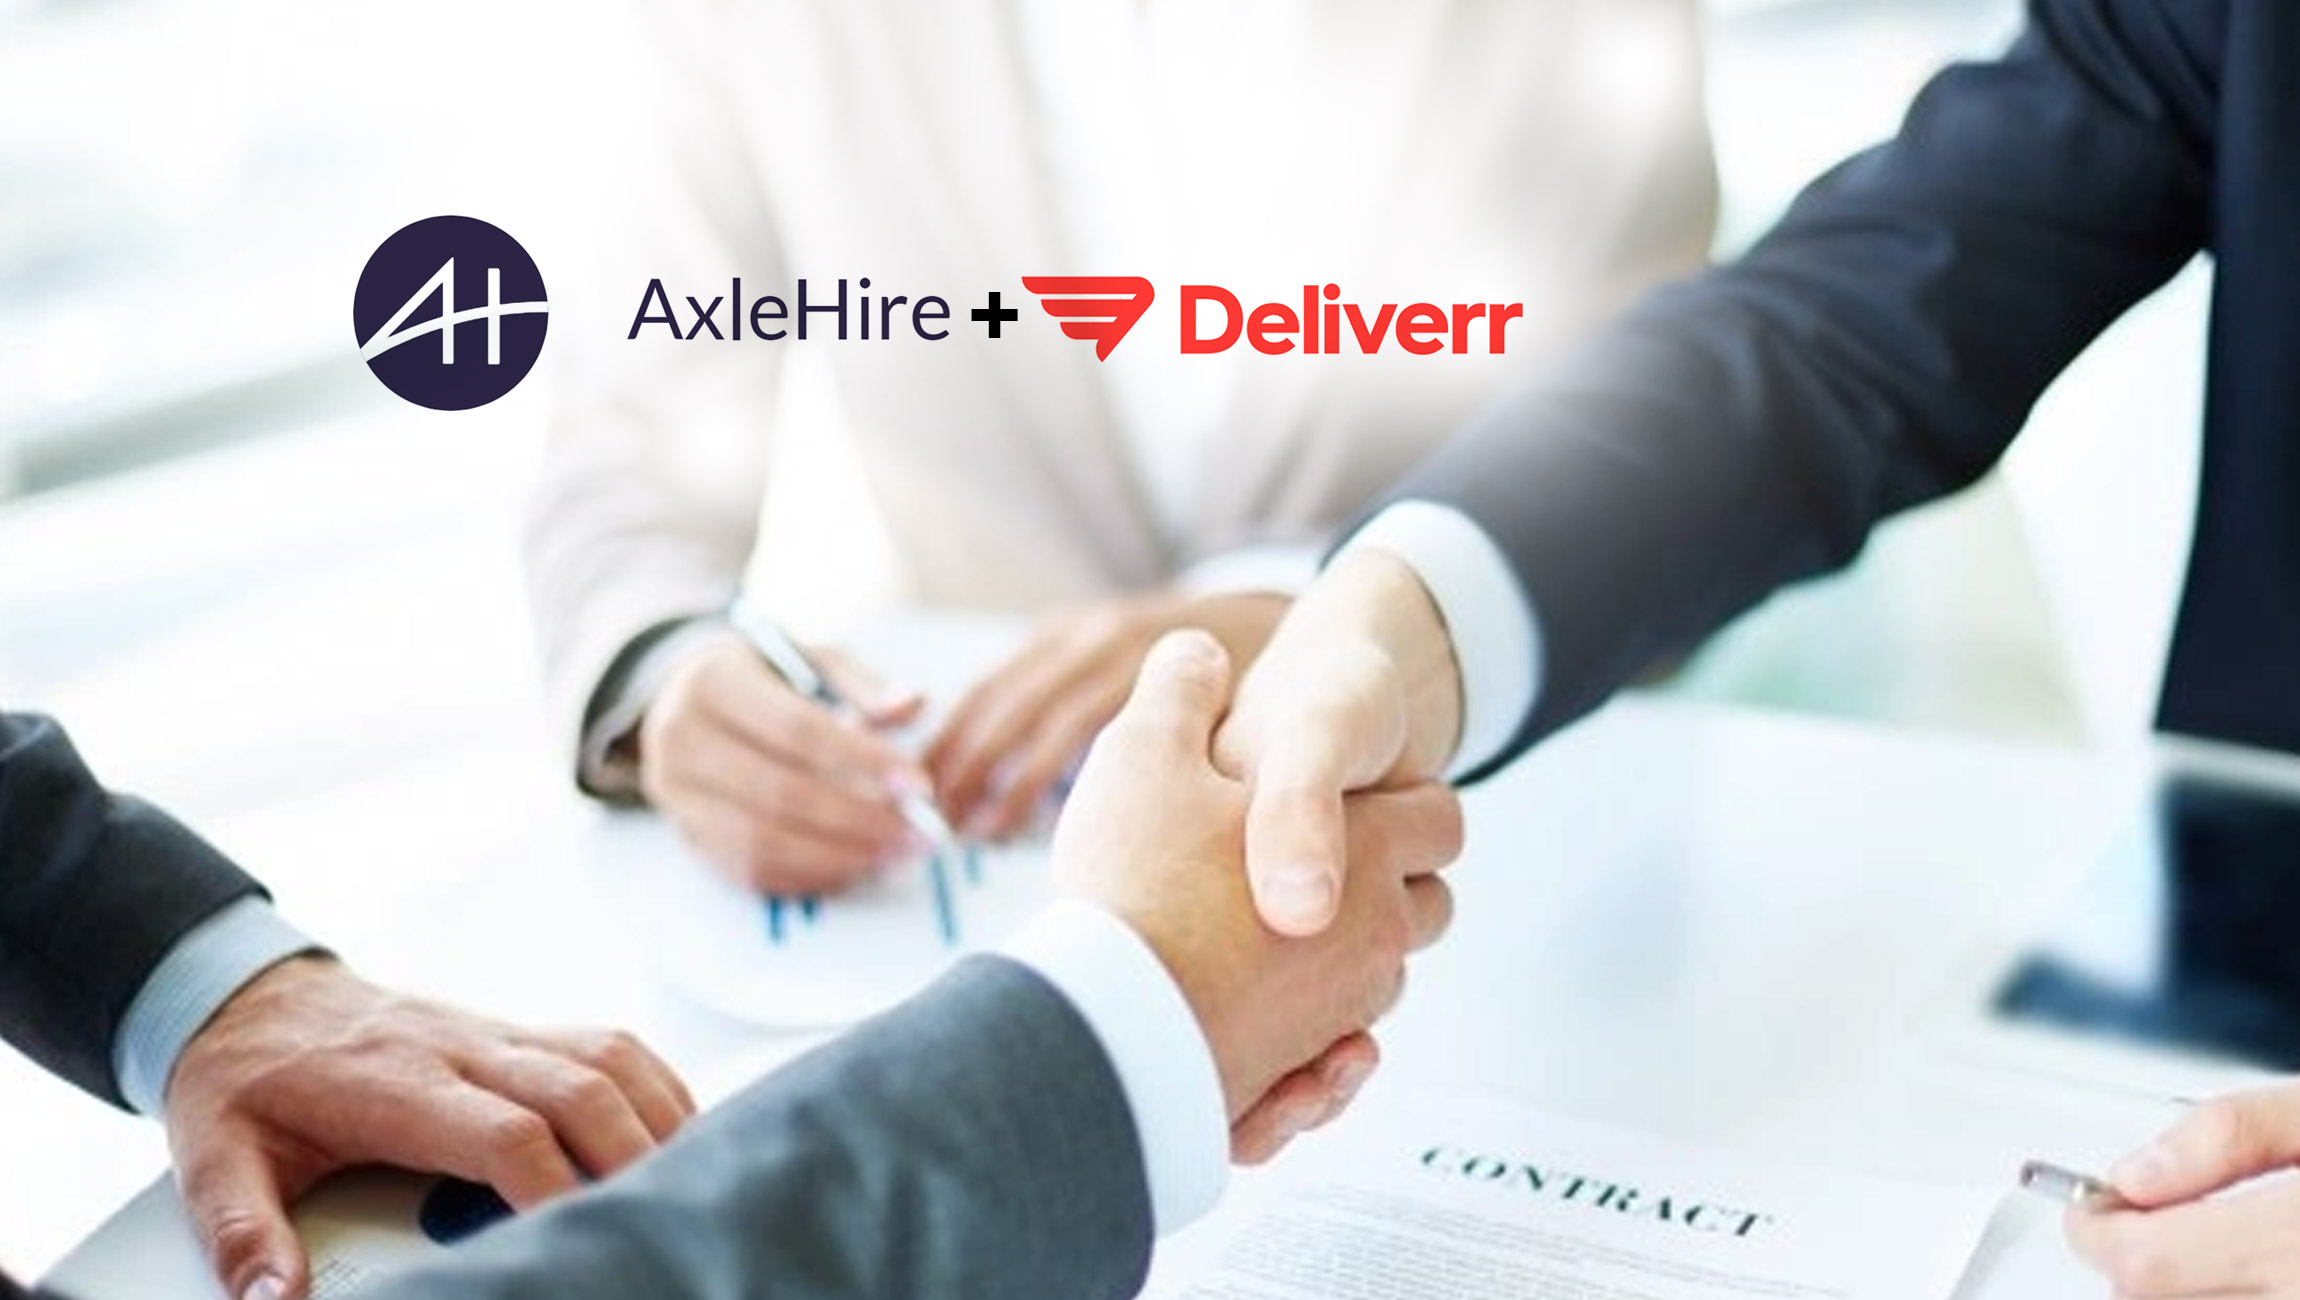 AxleHire Partners with Deliverr to Provide an ‘Amazon-Like’ Next-Day Delivery Experience to eCommerce Retailers